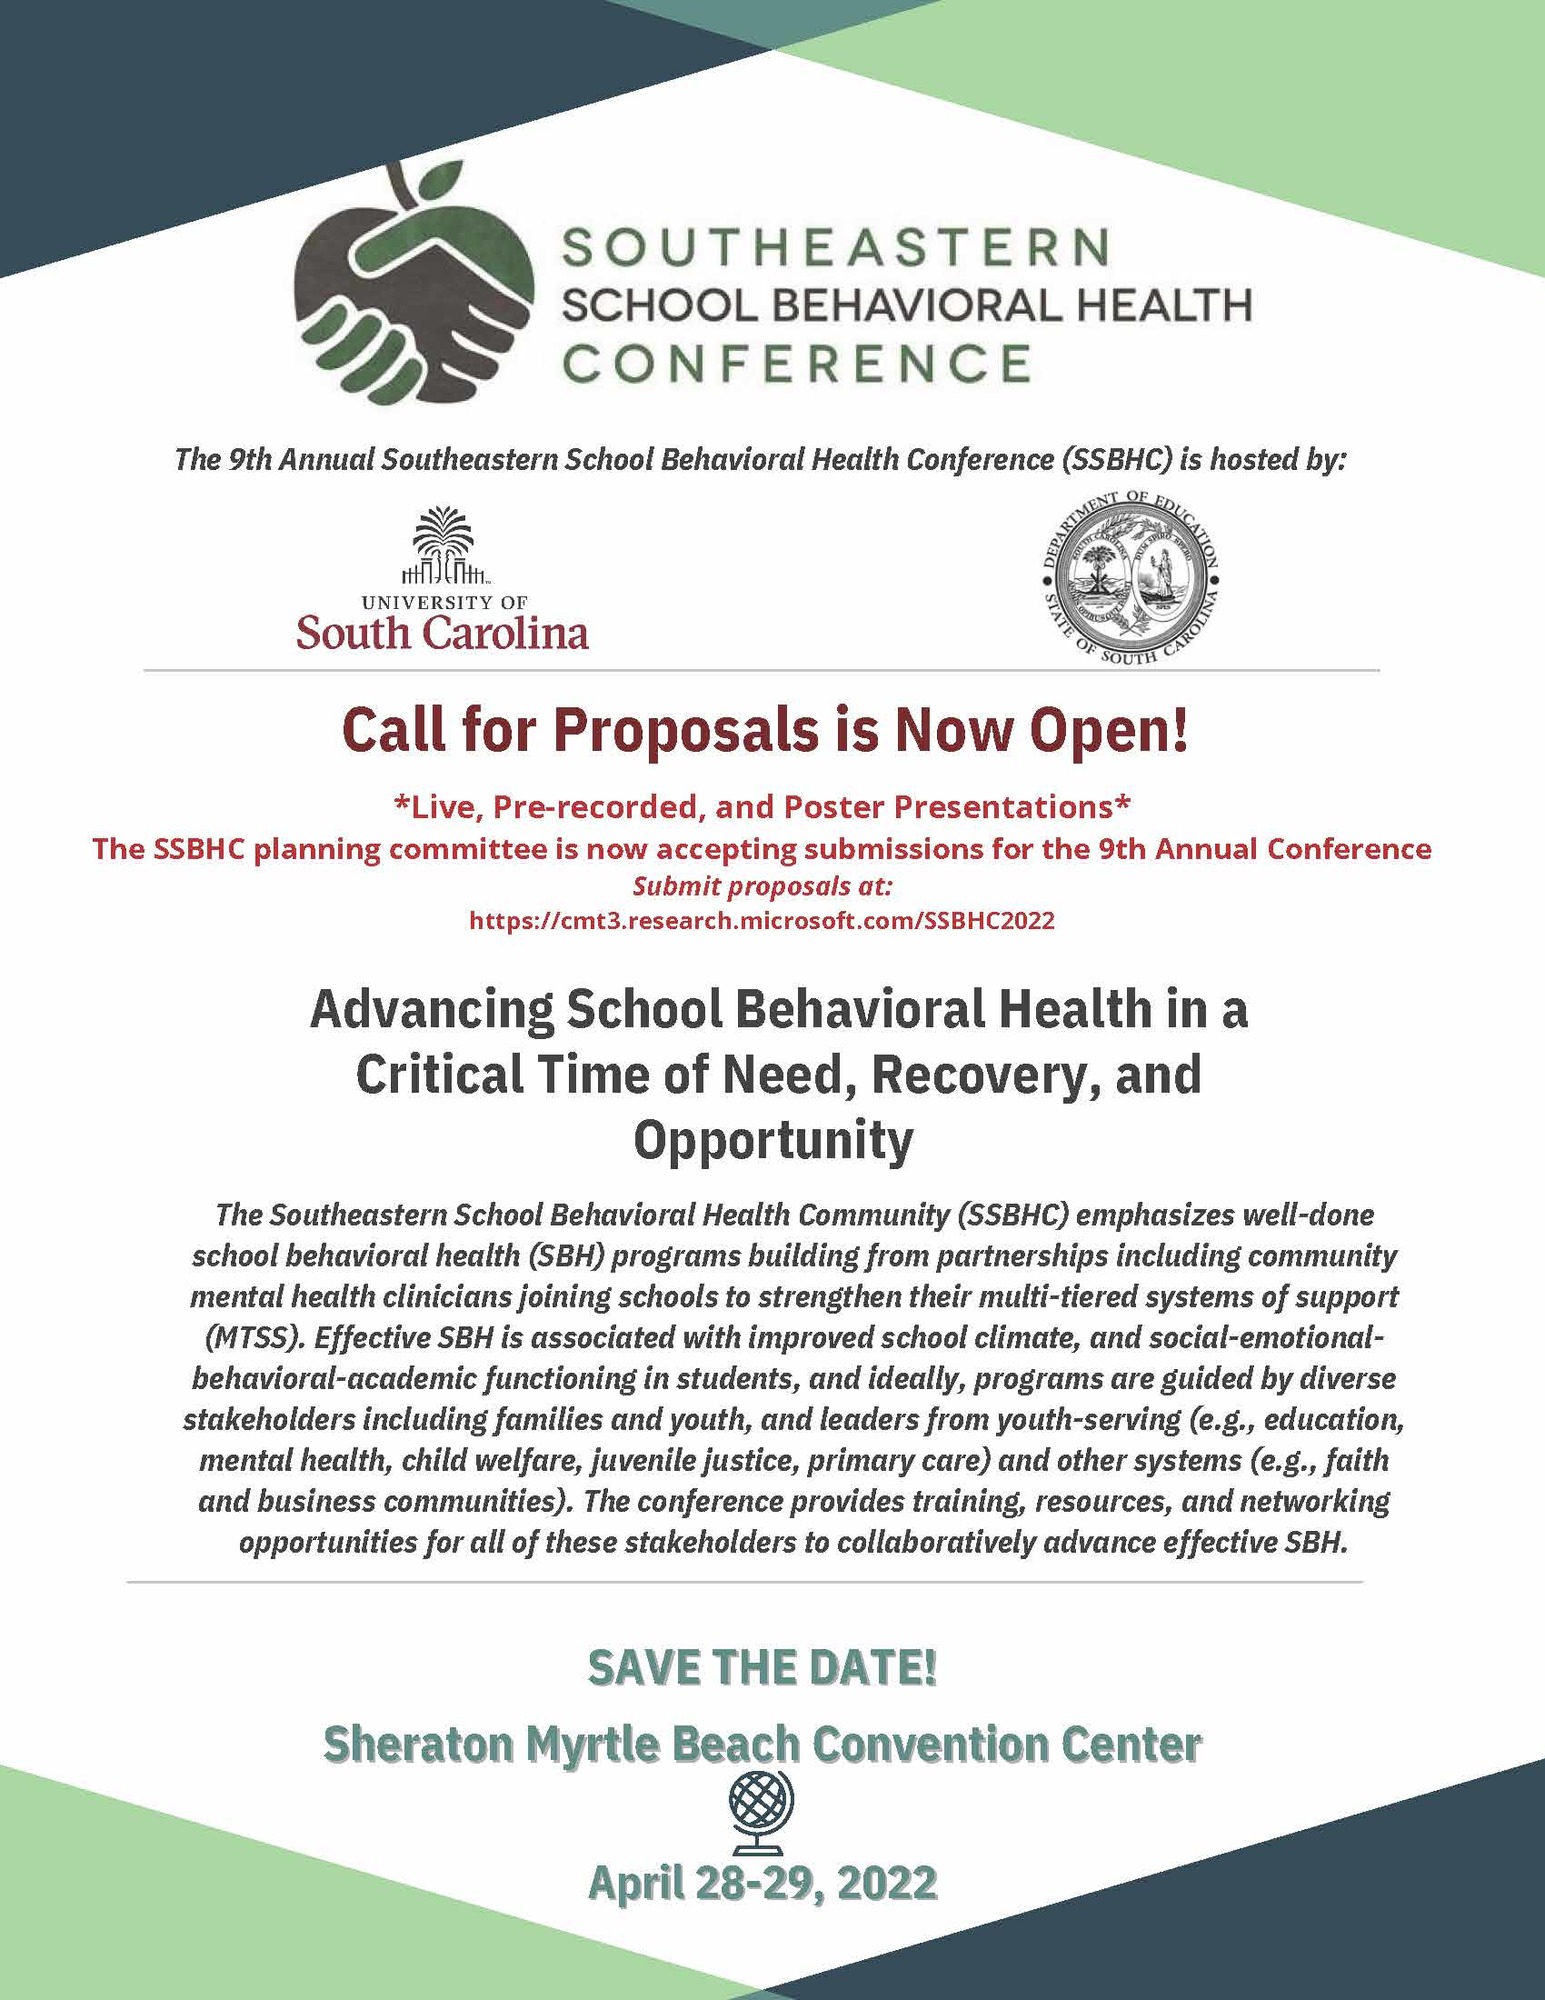 Southeastern School Behavioral Health Conference - call for proposals